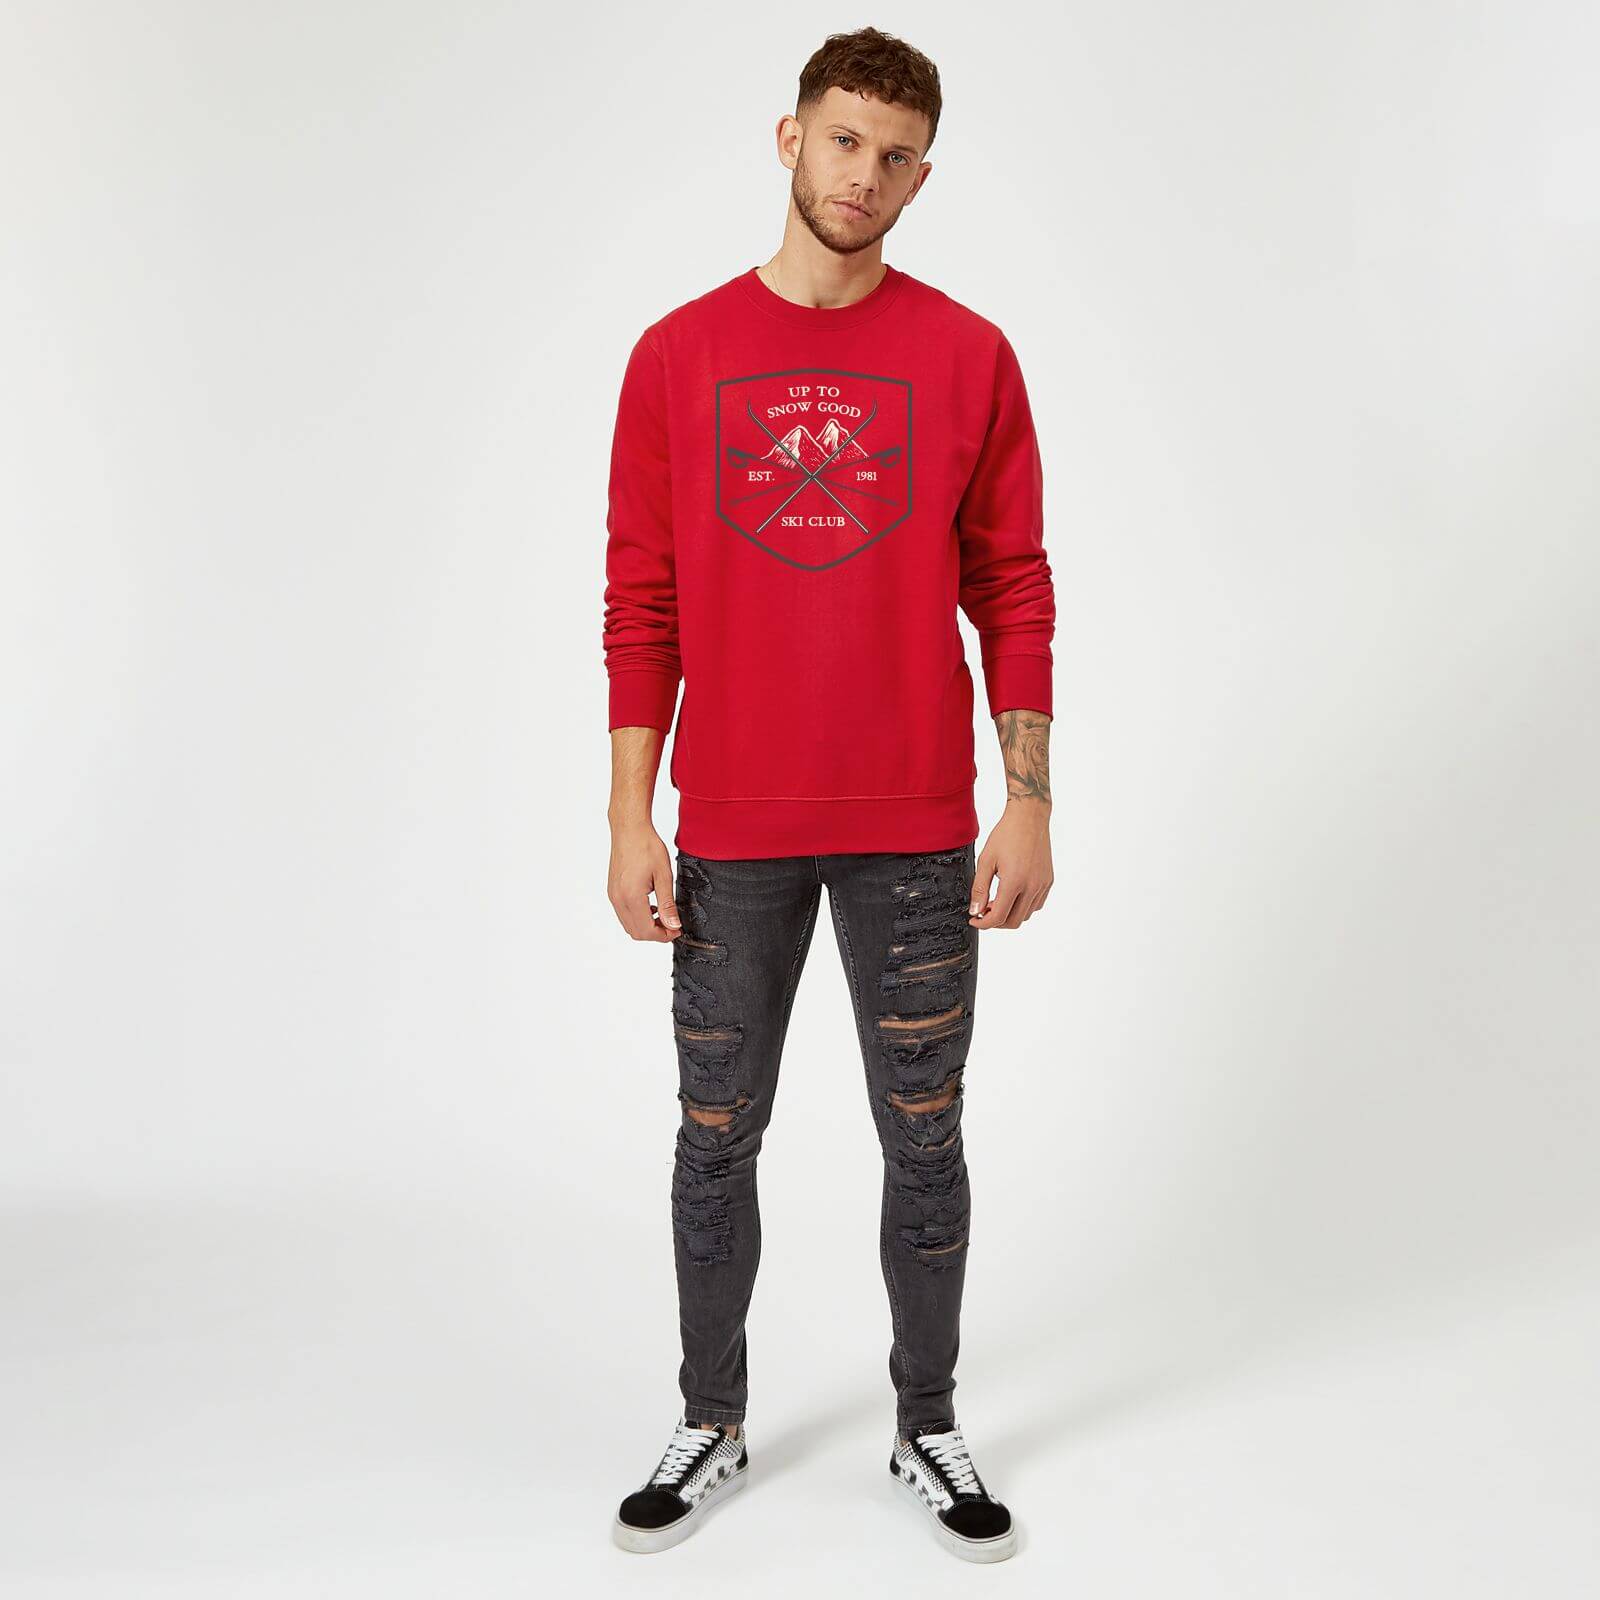 Up To Snow Good Christmas Sweatshirt - Red - M - Red